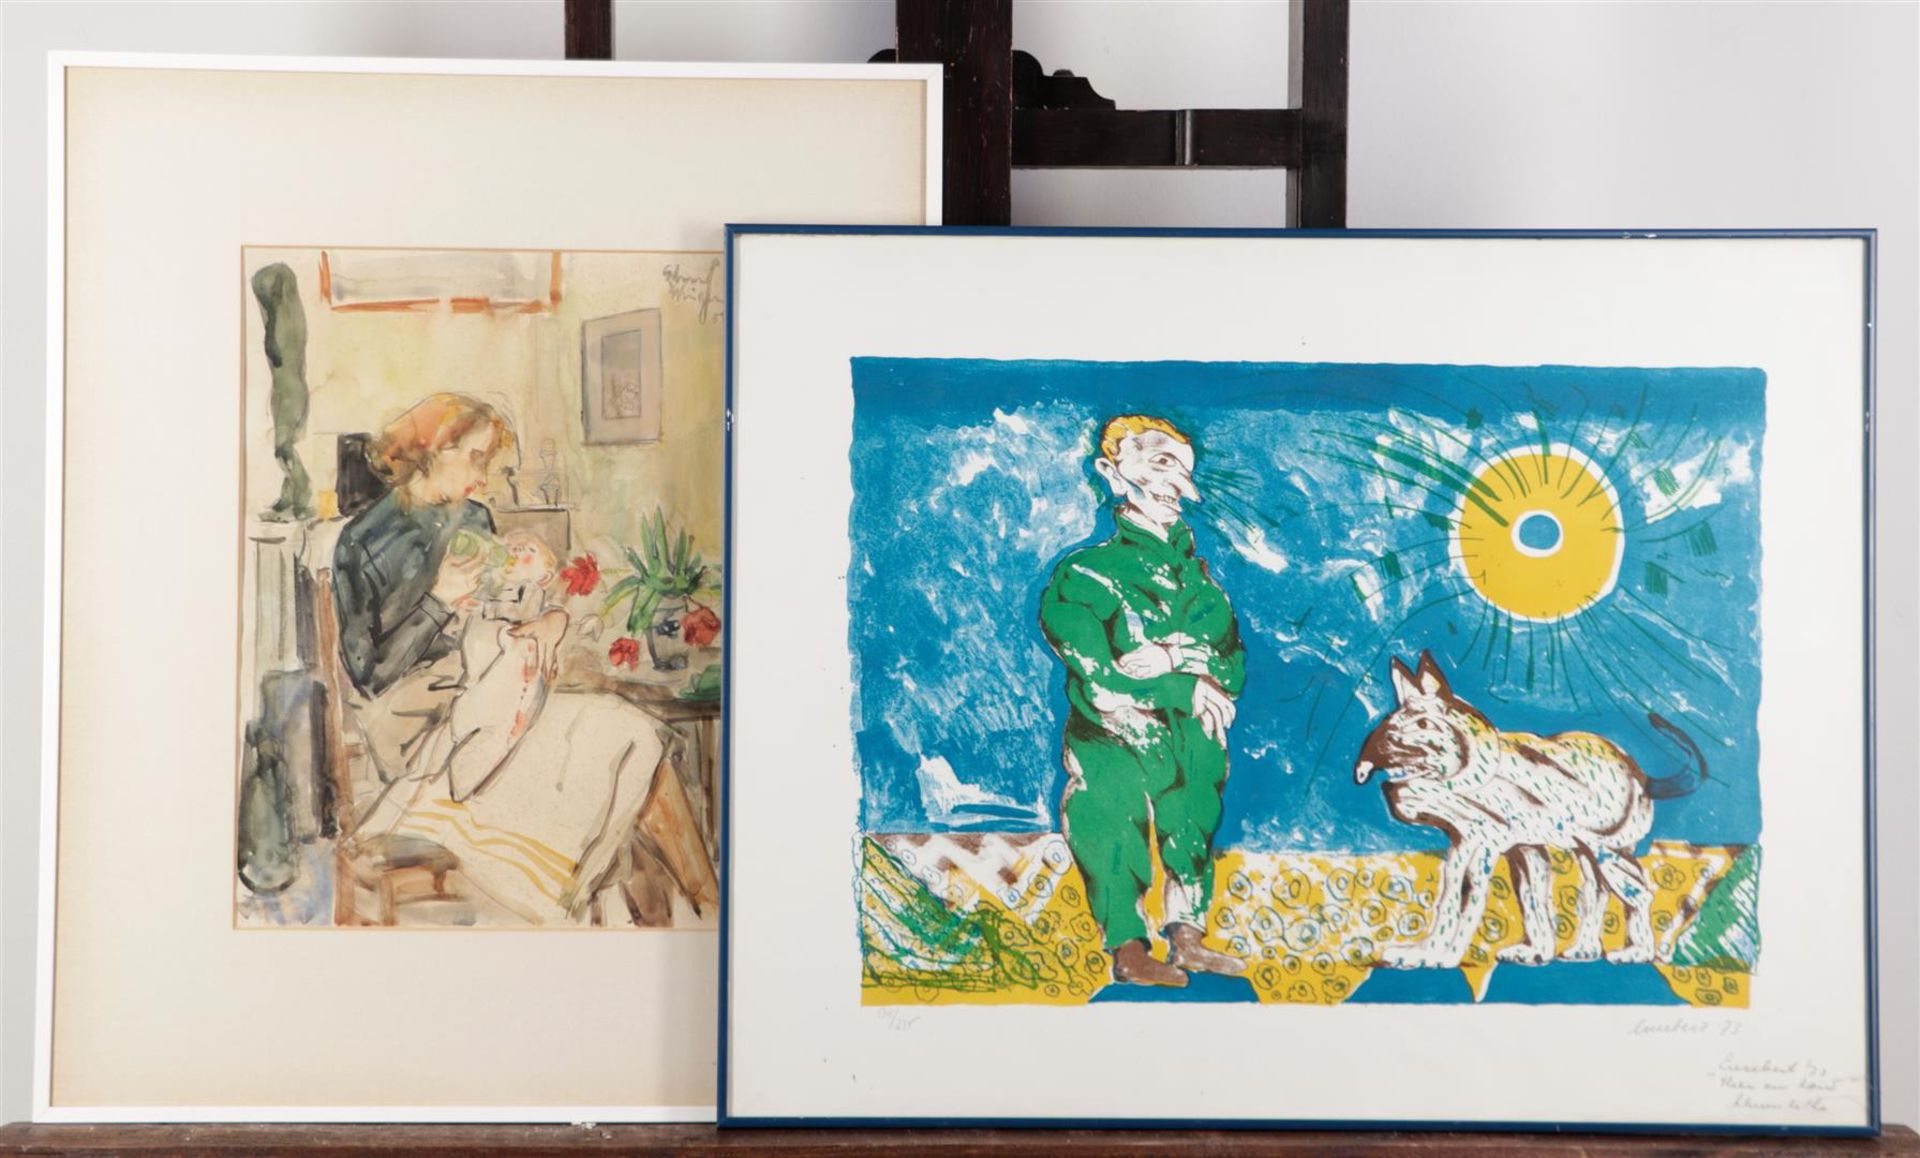 Edmond Wingen (1906 - 1971), Giving the bottle, signed (top right), watercolor on paper. Includes a 